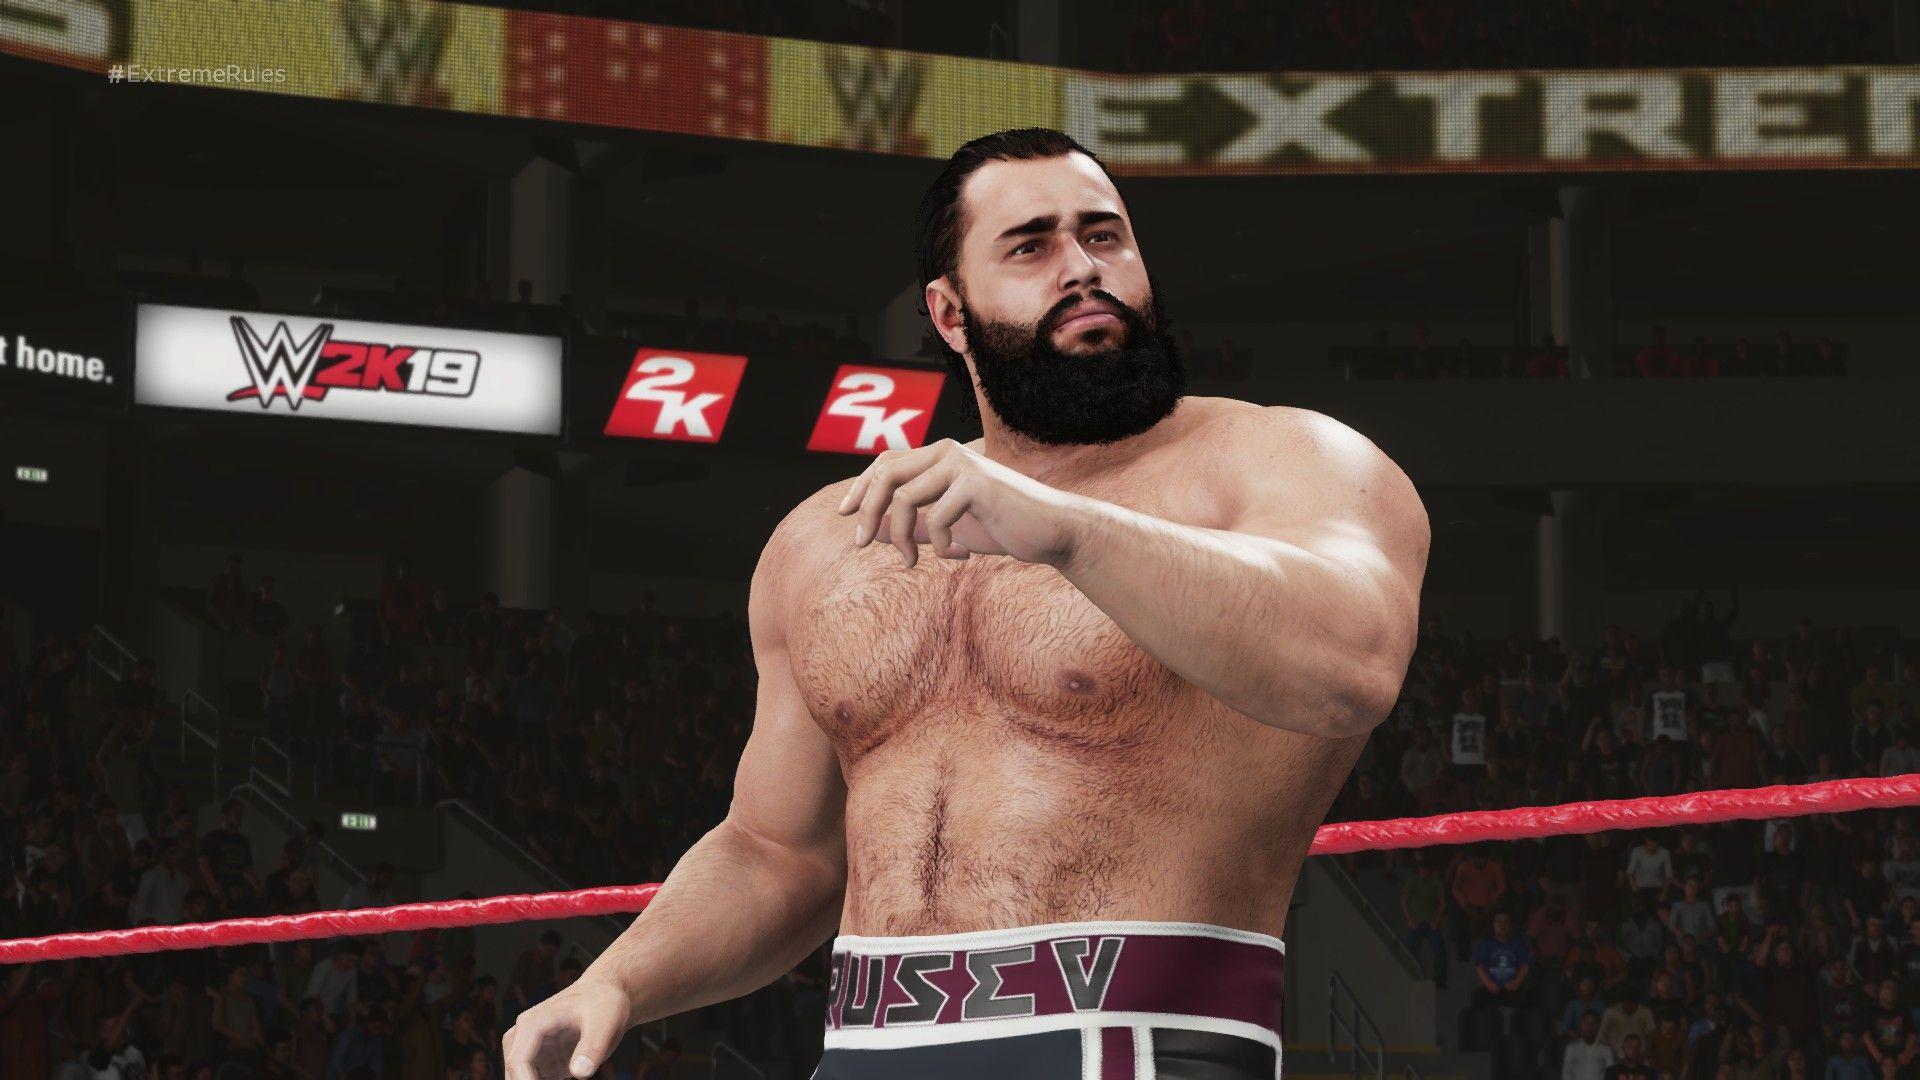 WWE 2K19 Benchmark and Technical Review: Yes Locked At 60 FPS. PC